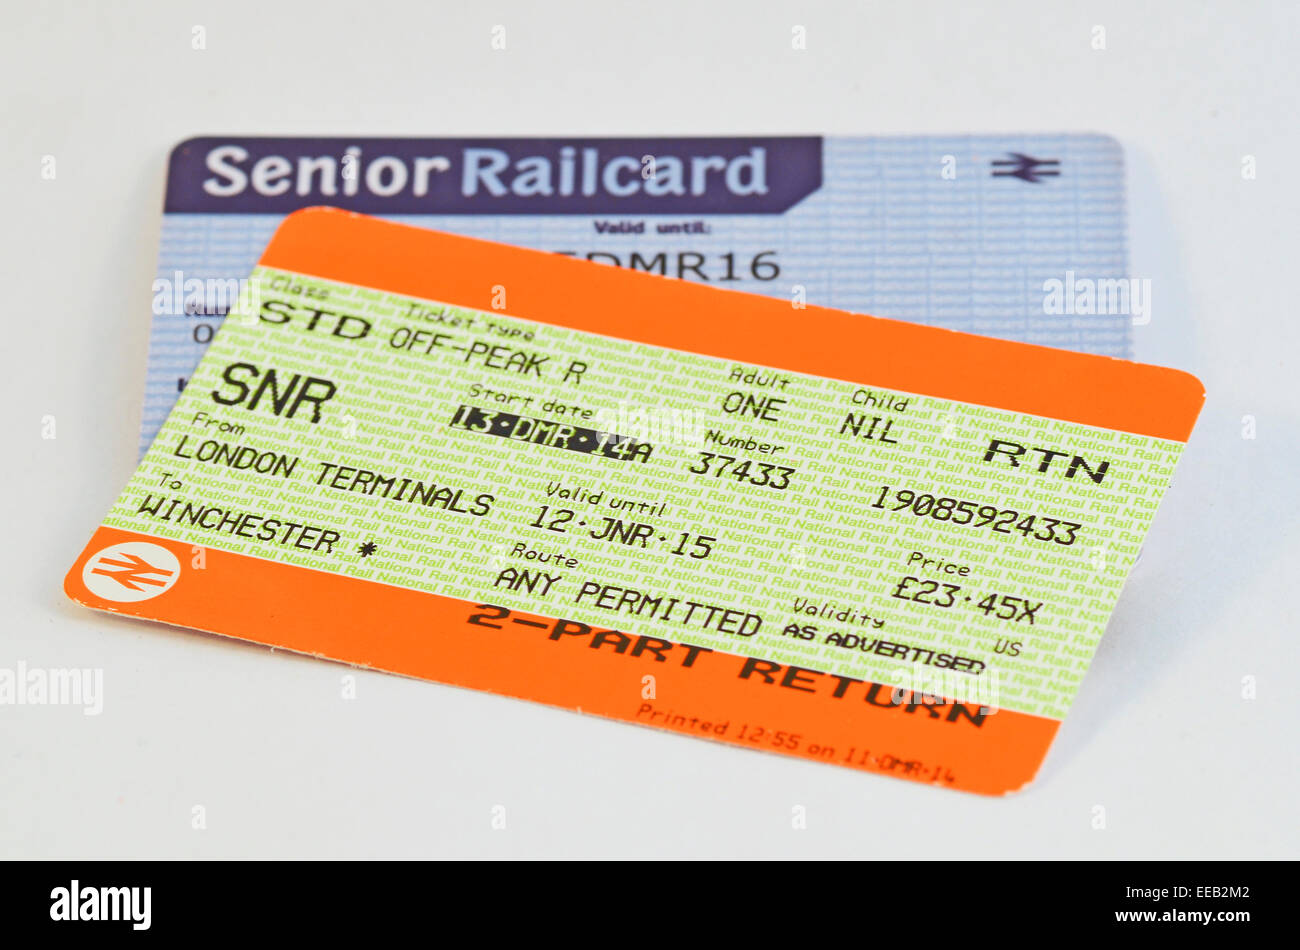 train travel card for over 60s